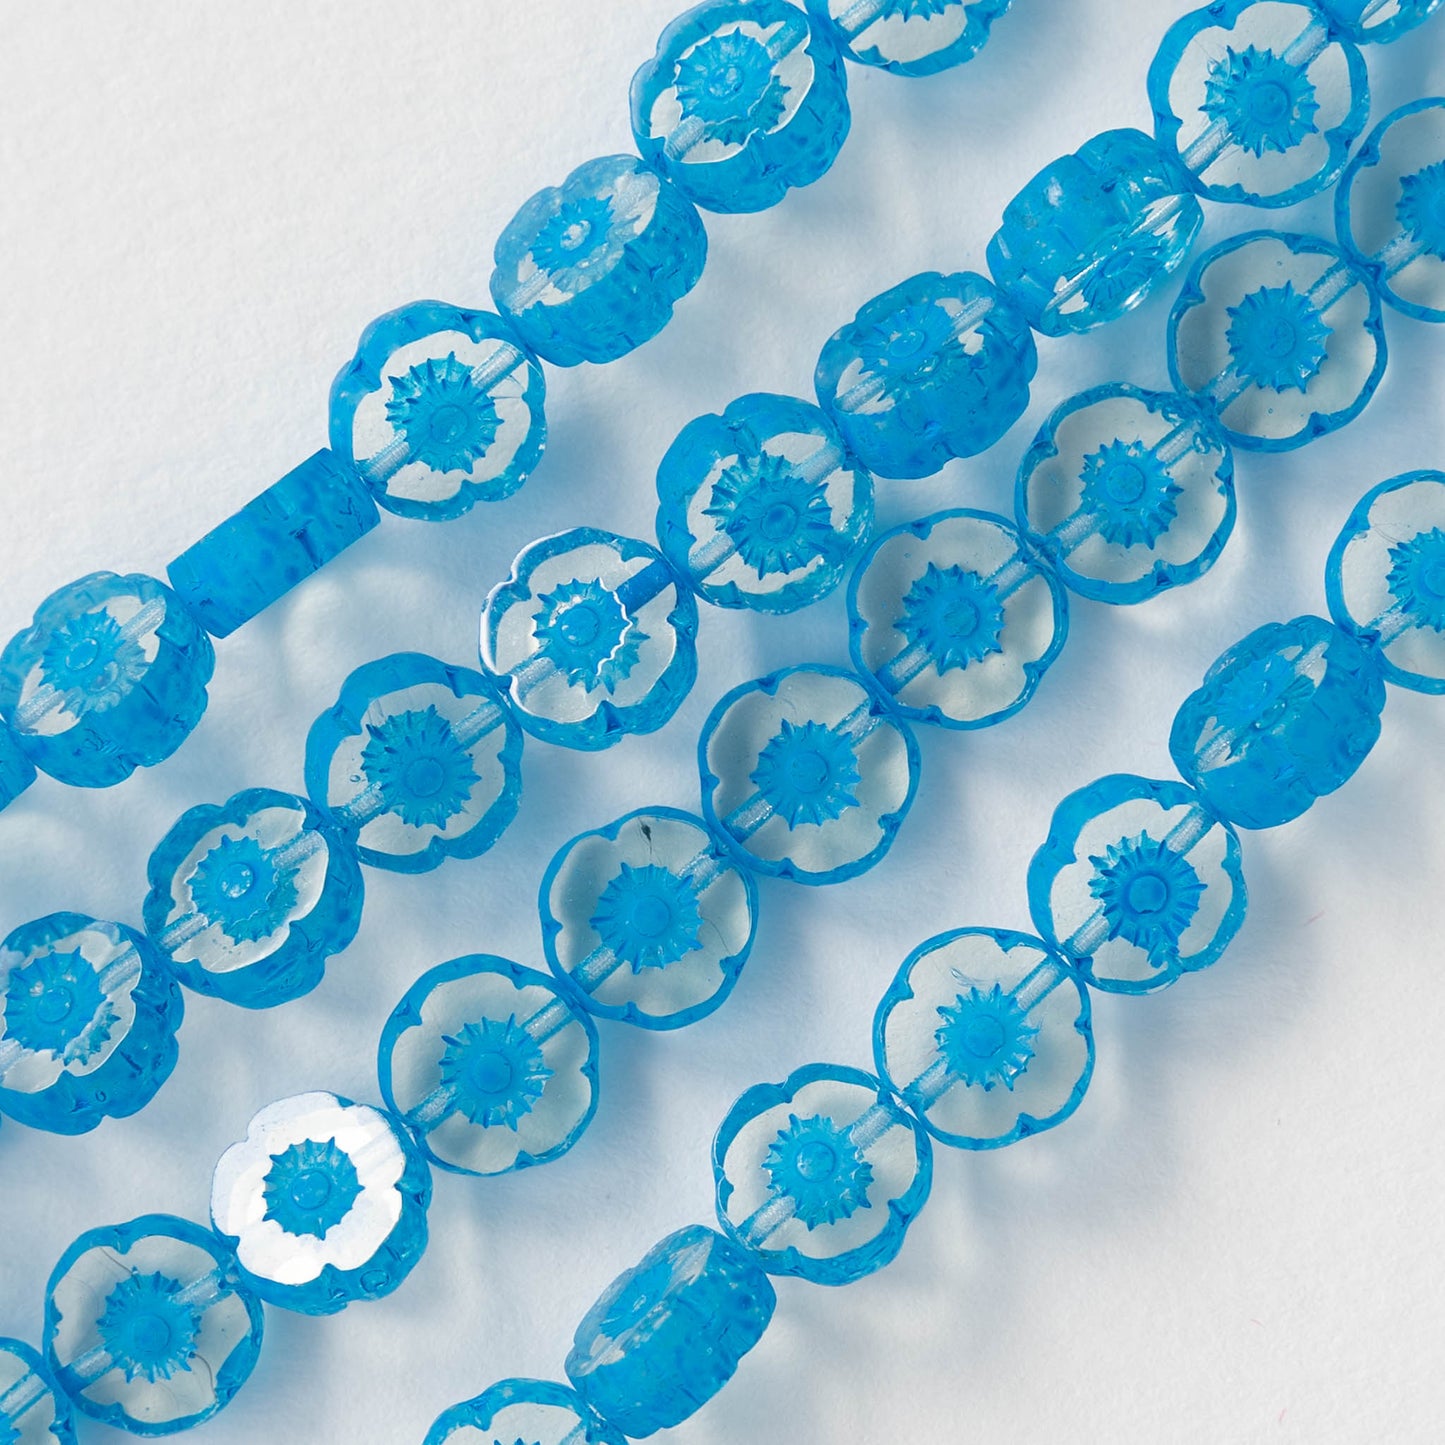 8mm Flower Beads - Crystal with Blue -20 Beads